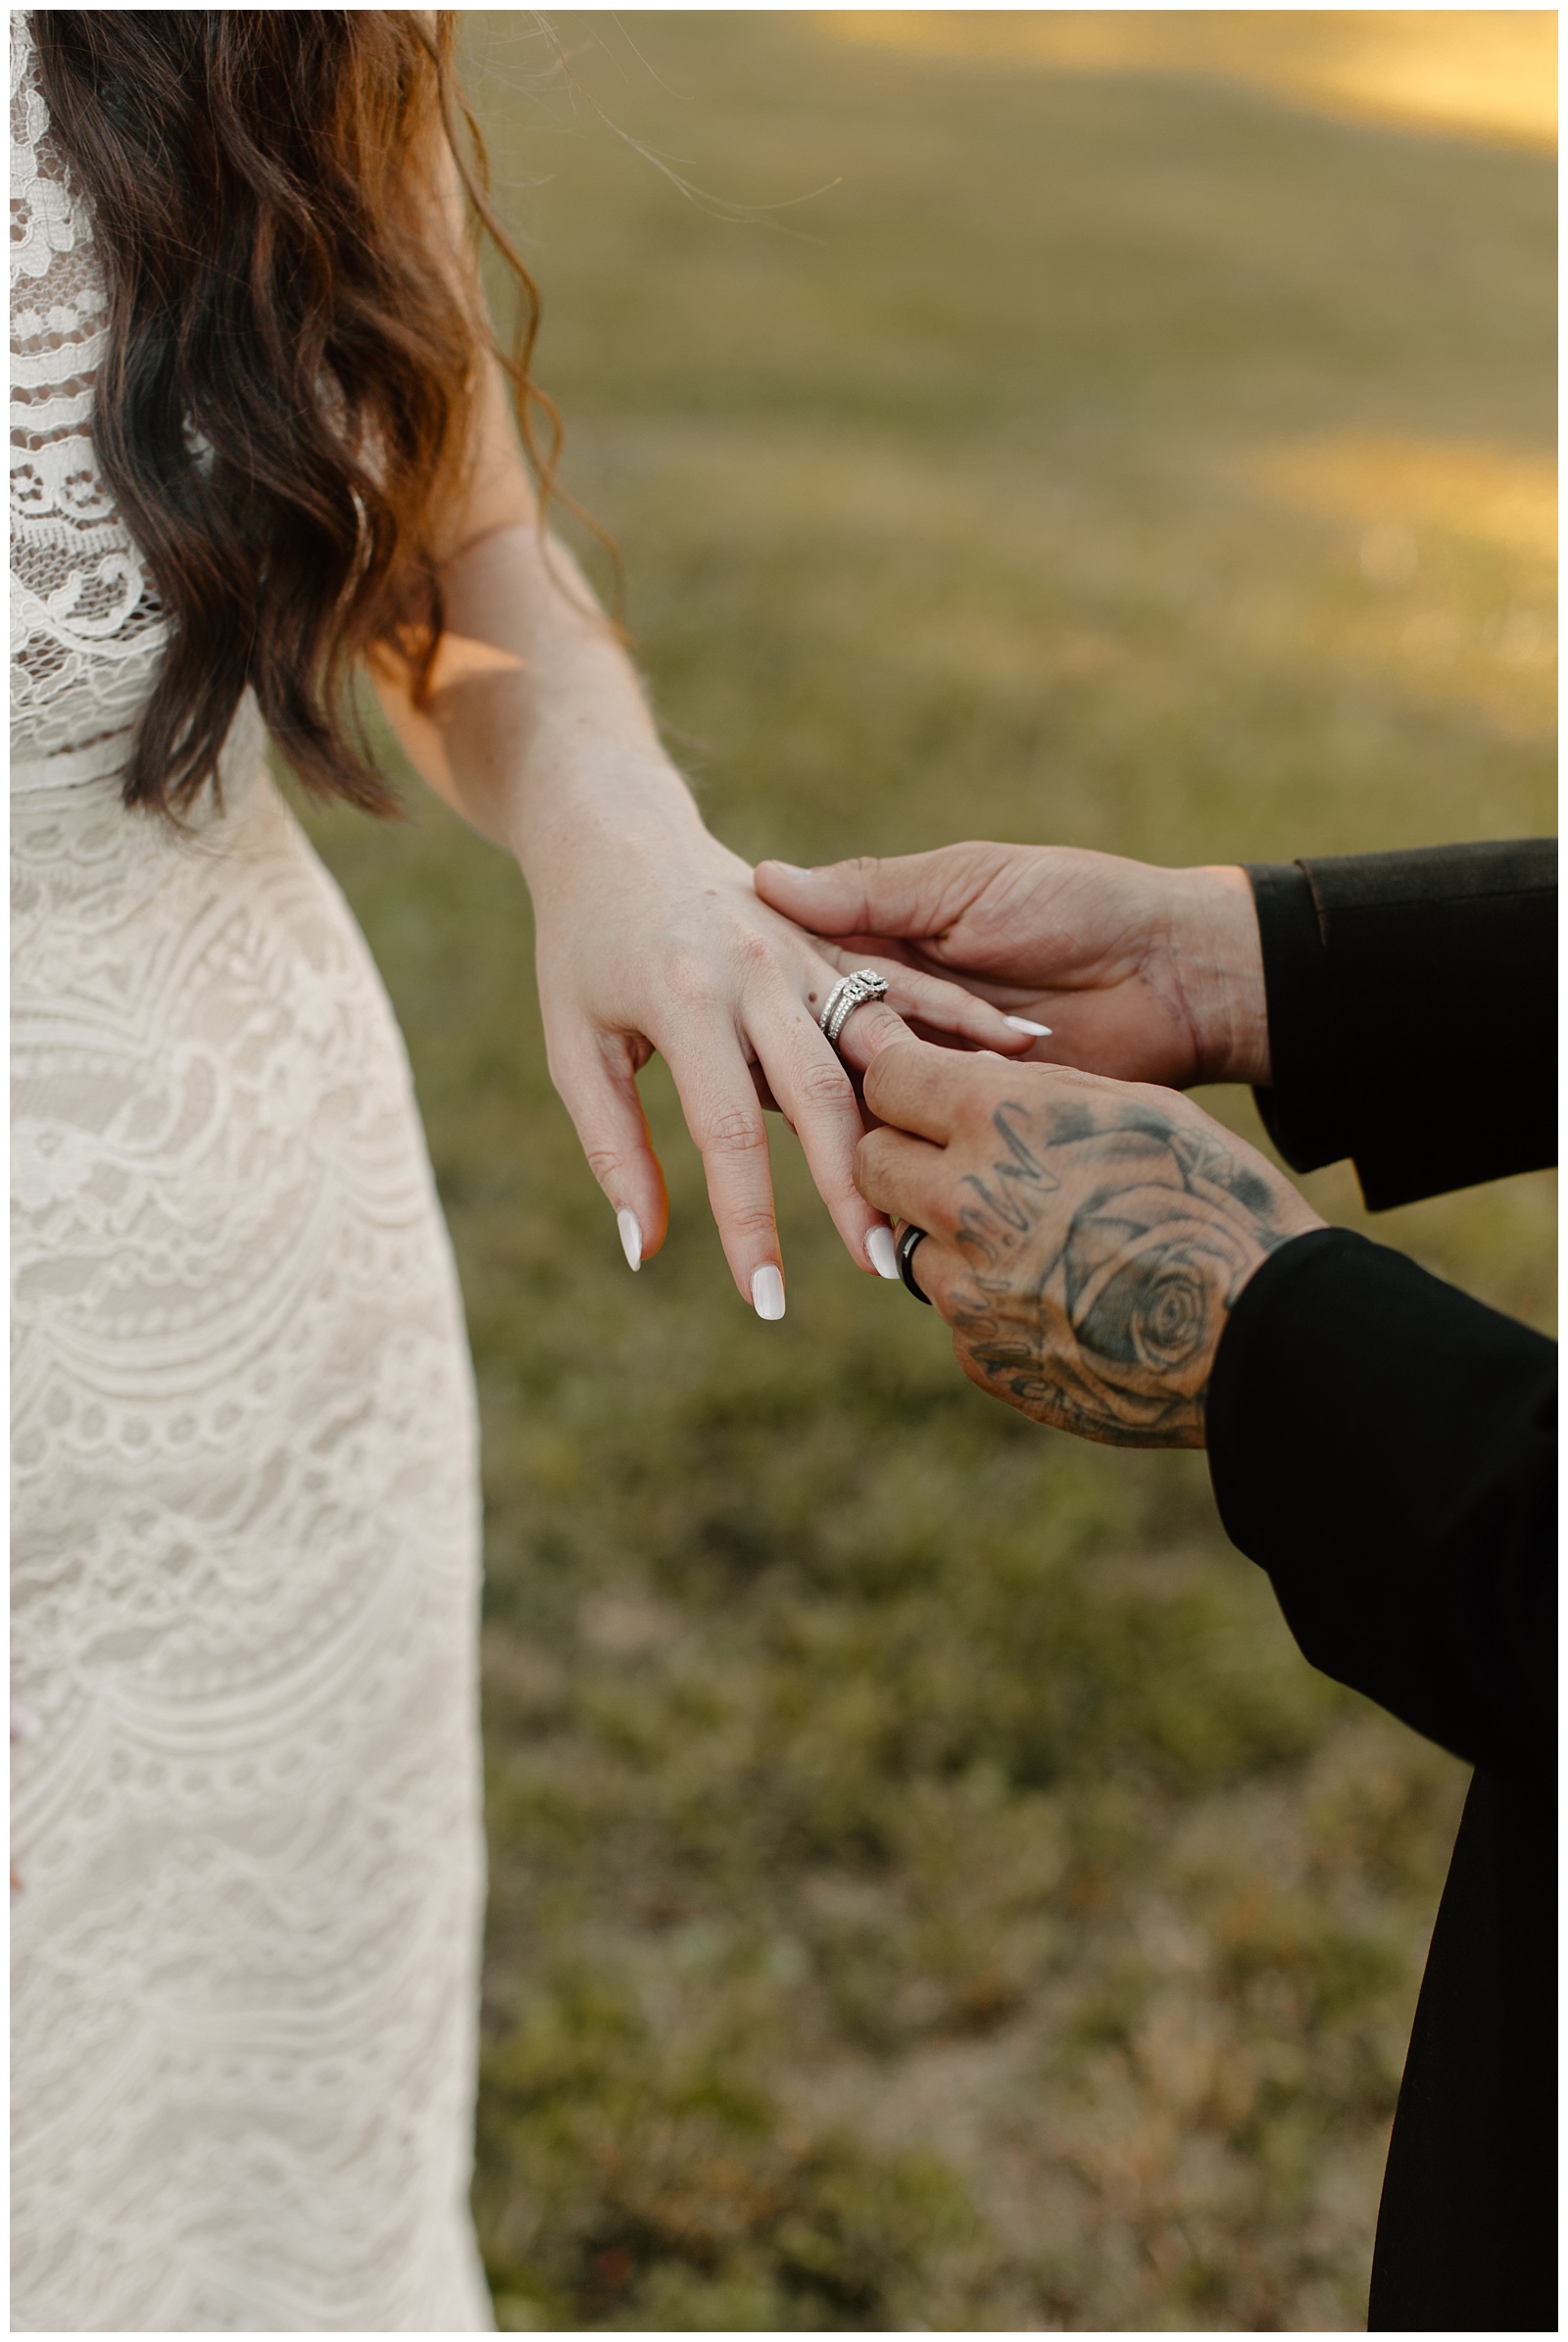 Romantic sunset portrait of newlywed couple showing off engagement and wedding rings with hand tattoos showing